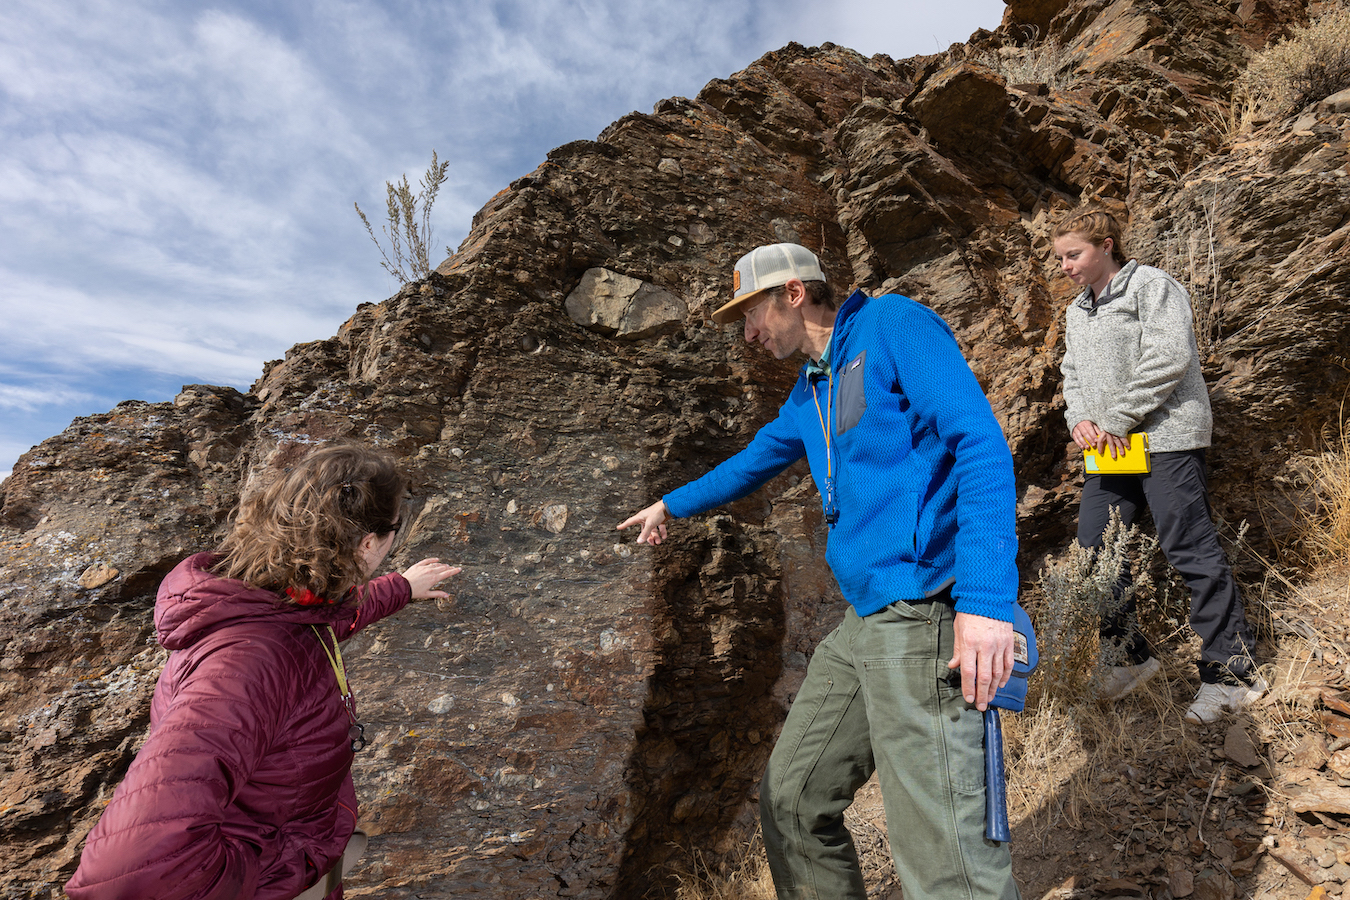 Kendra Murray, assistant professor of geosciences, left, Dave Pearson, associate professor of geosciences, center, and Anna Miller, master’s student, inspect a rock outcropping in Pocatello, Idaho on Tuesday, November 01, 2022.